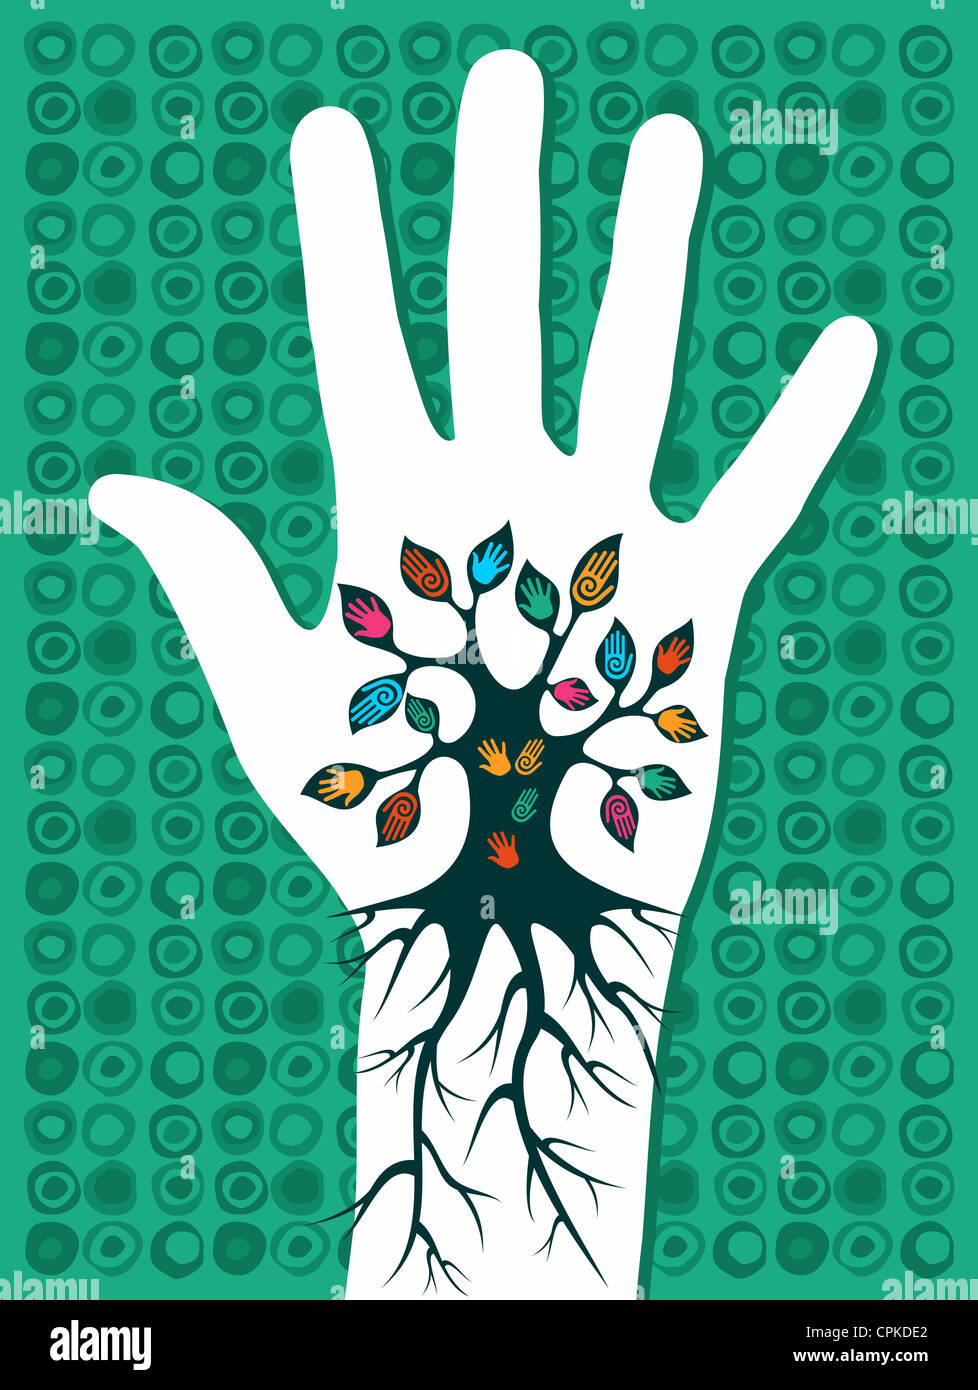 Go green concept tree in hand with roots as veins. Vector file layered for easy manipulation and custom coloring. Stock Photo